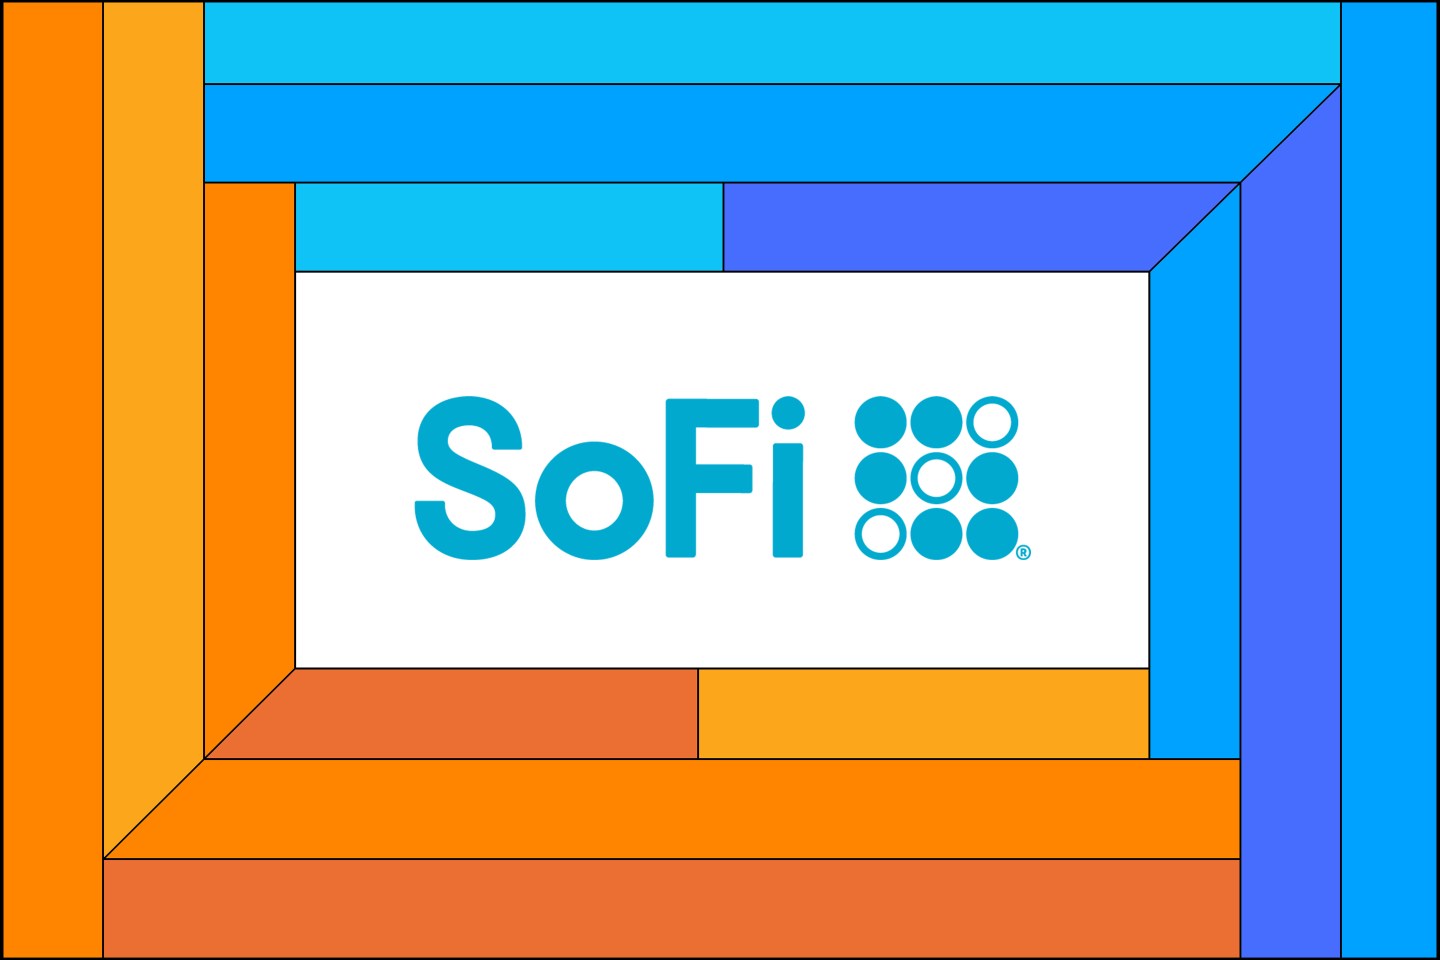 Illustration of the SoFi Bank logo surrounded by a orange and blue frame.